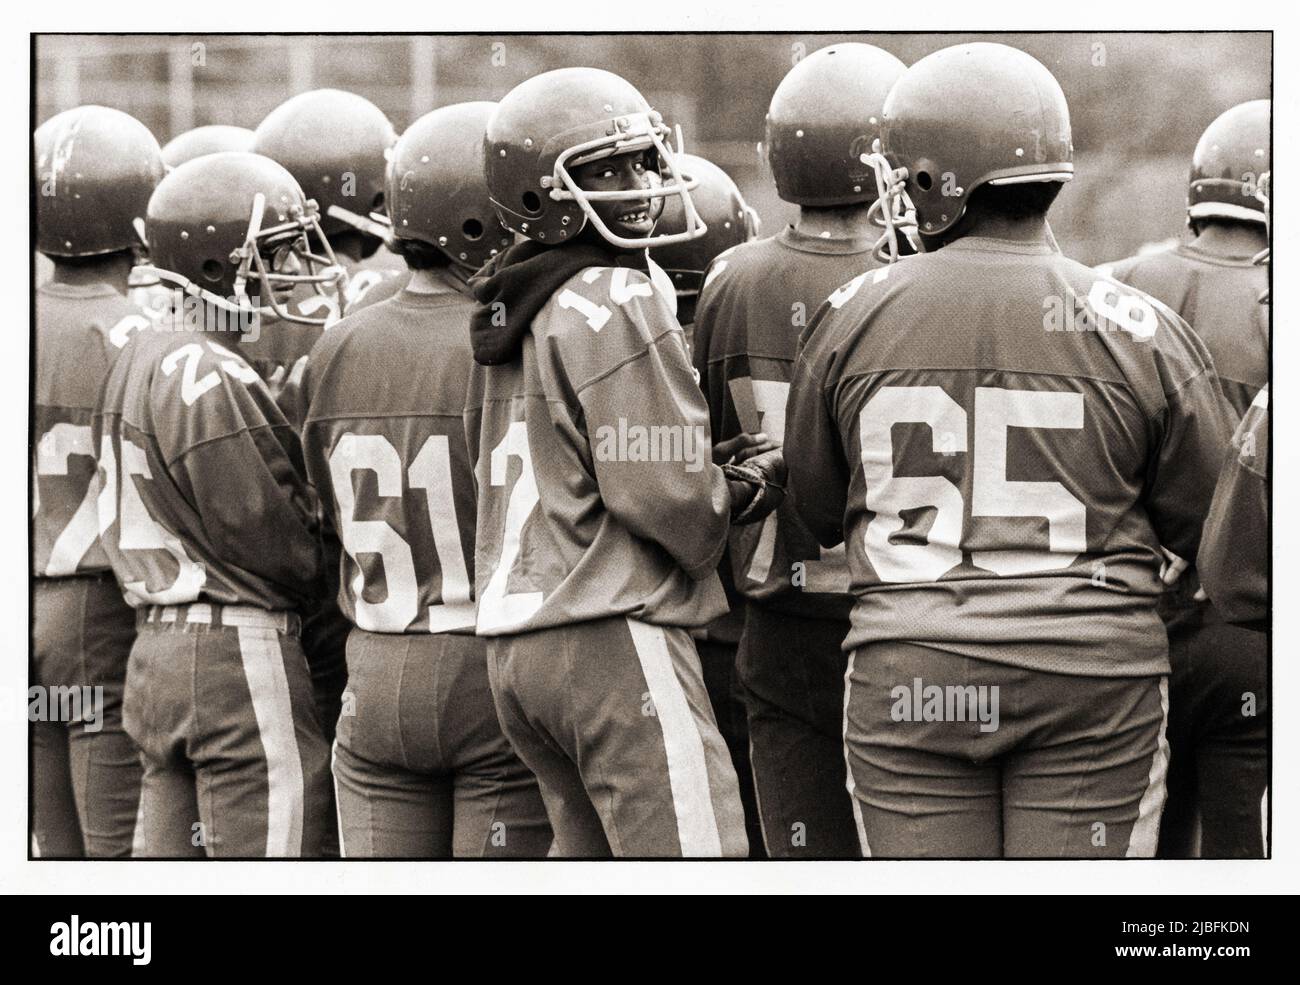 FACE IN THE CrOWD. Members of the John Jay High School football team at a 1982 practice session in Prospect Park, Brooklyn, New York City. Stock Photo